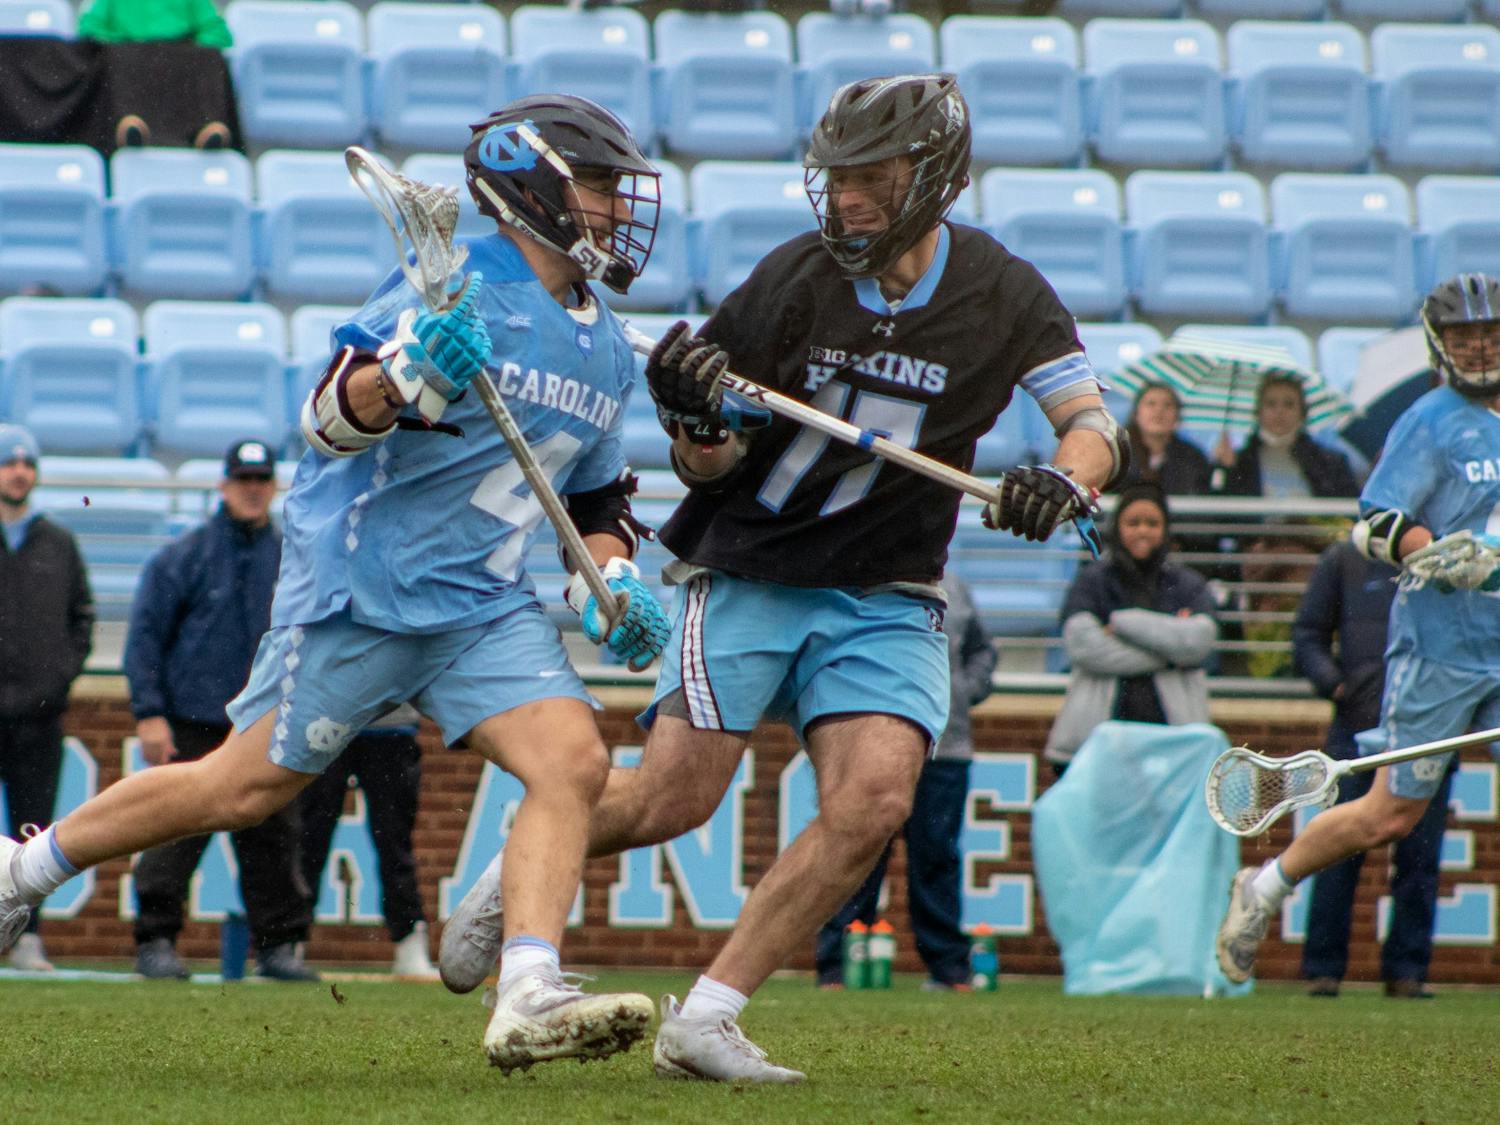 UNC grad student attackman Chris Gray (4) runs the ball down the field in the Feb. 27 men's lacrosse game against Johns Hopkins University. At the half, UNC led 9-6.